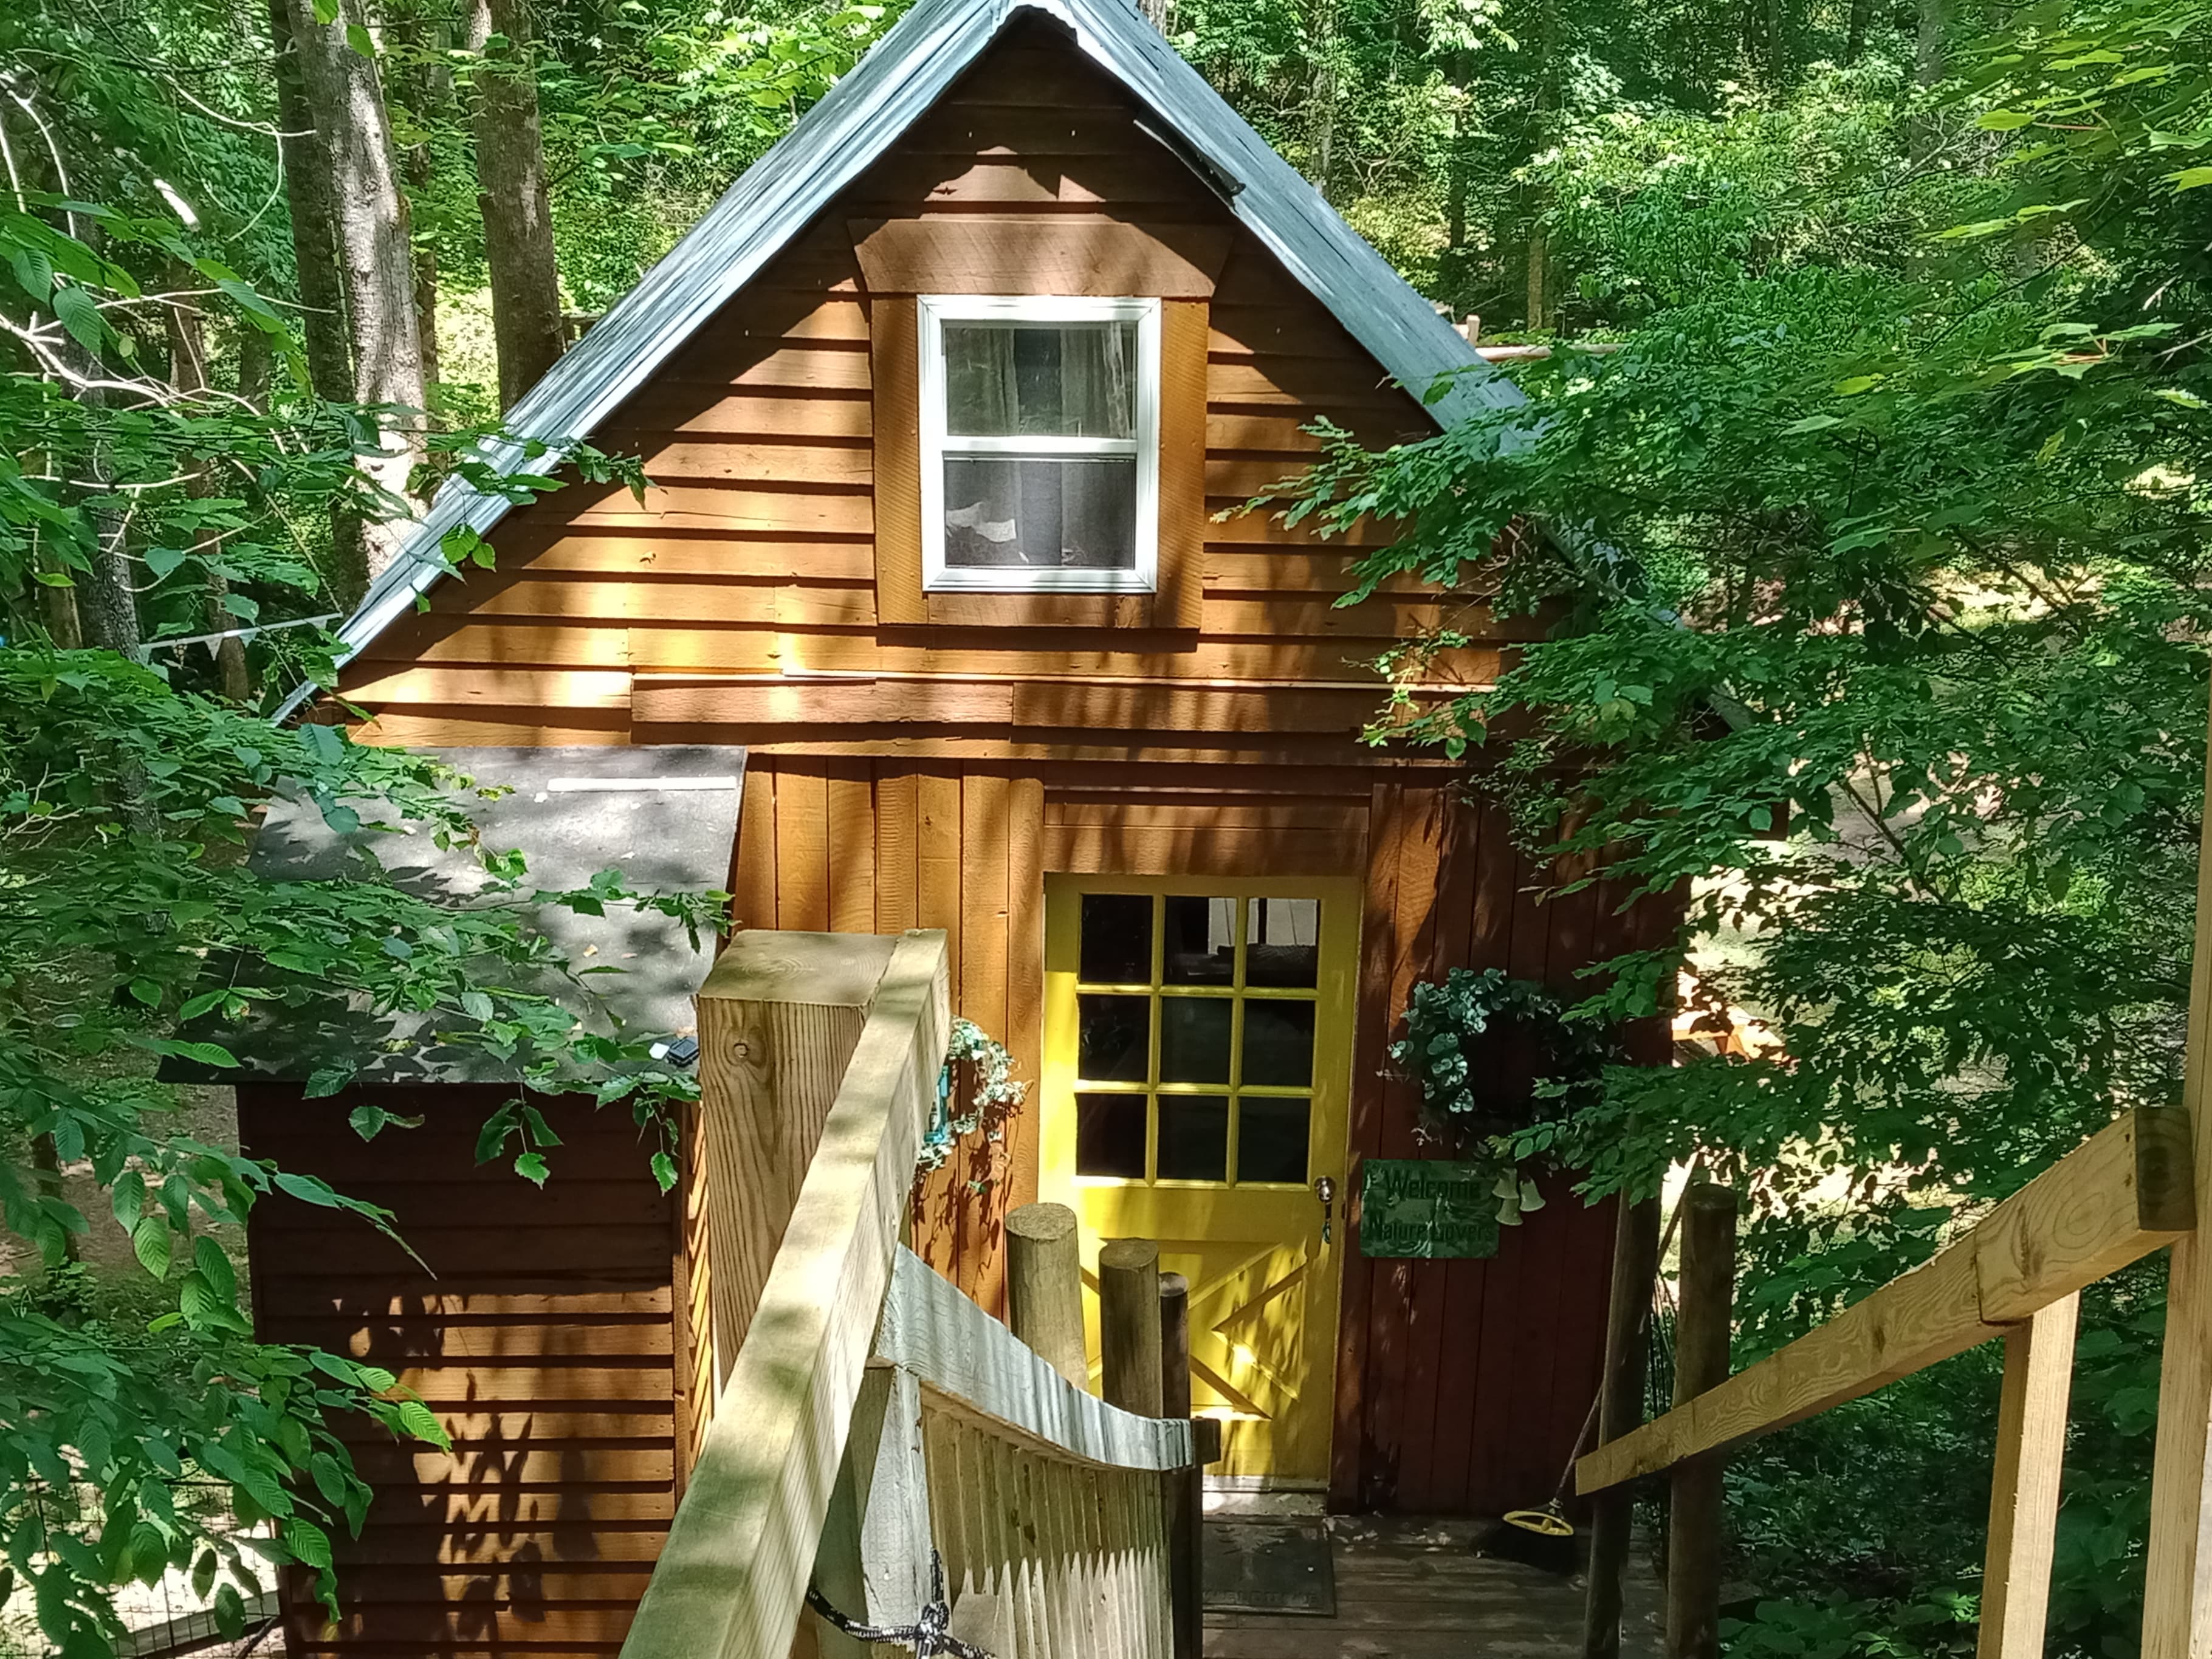 The front door of the treehouse. The interior is 12x12 with a loft bed, queen, and a deck facing the creek. The deck has an awning to protect you from rain. 